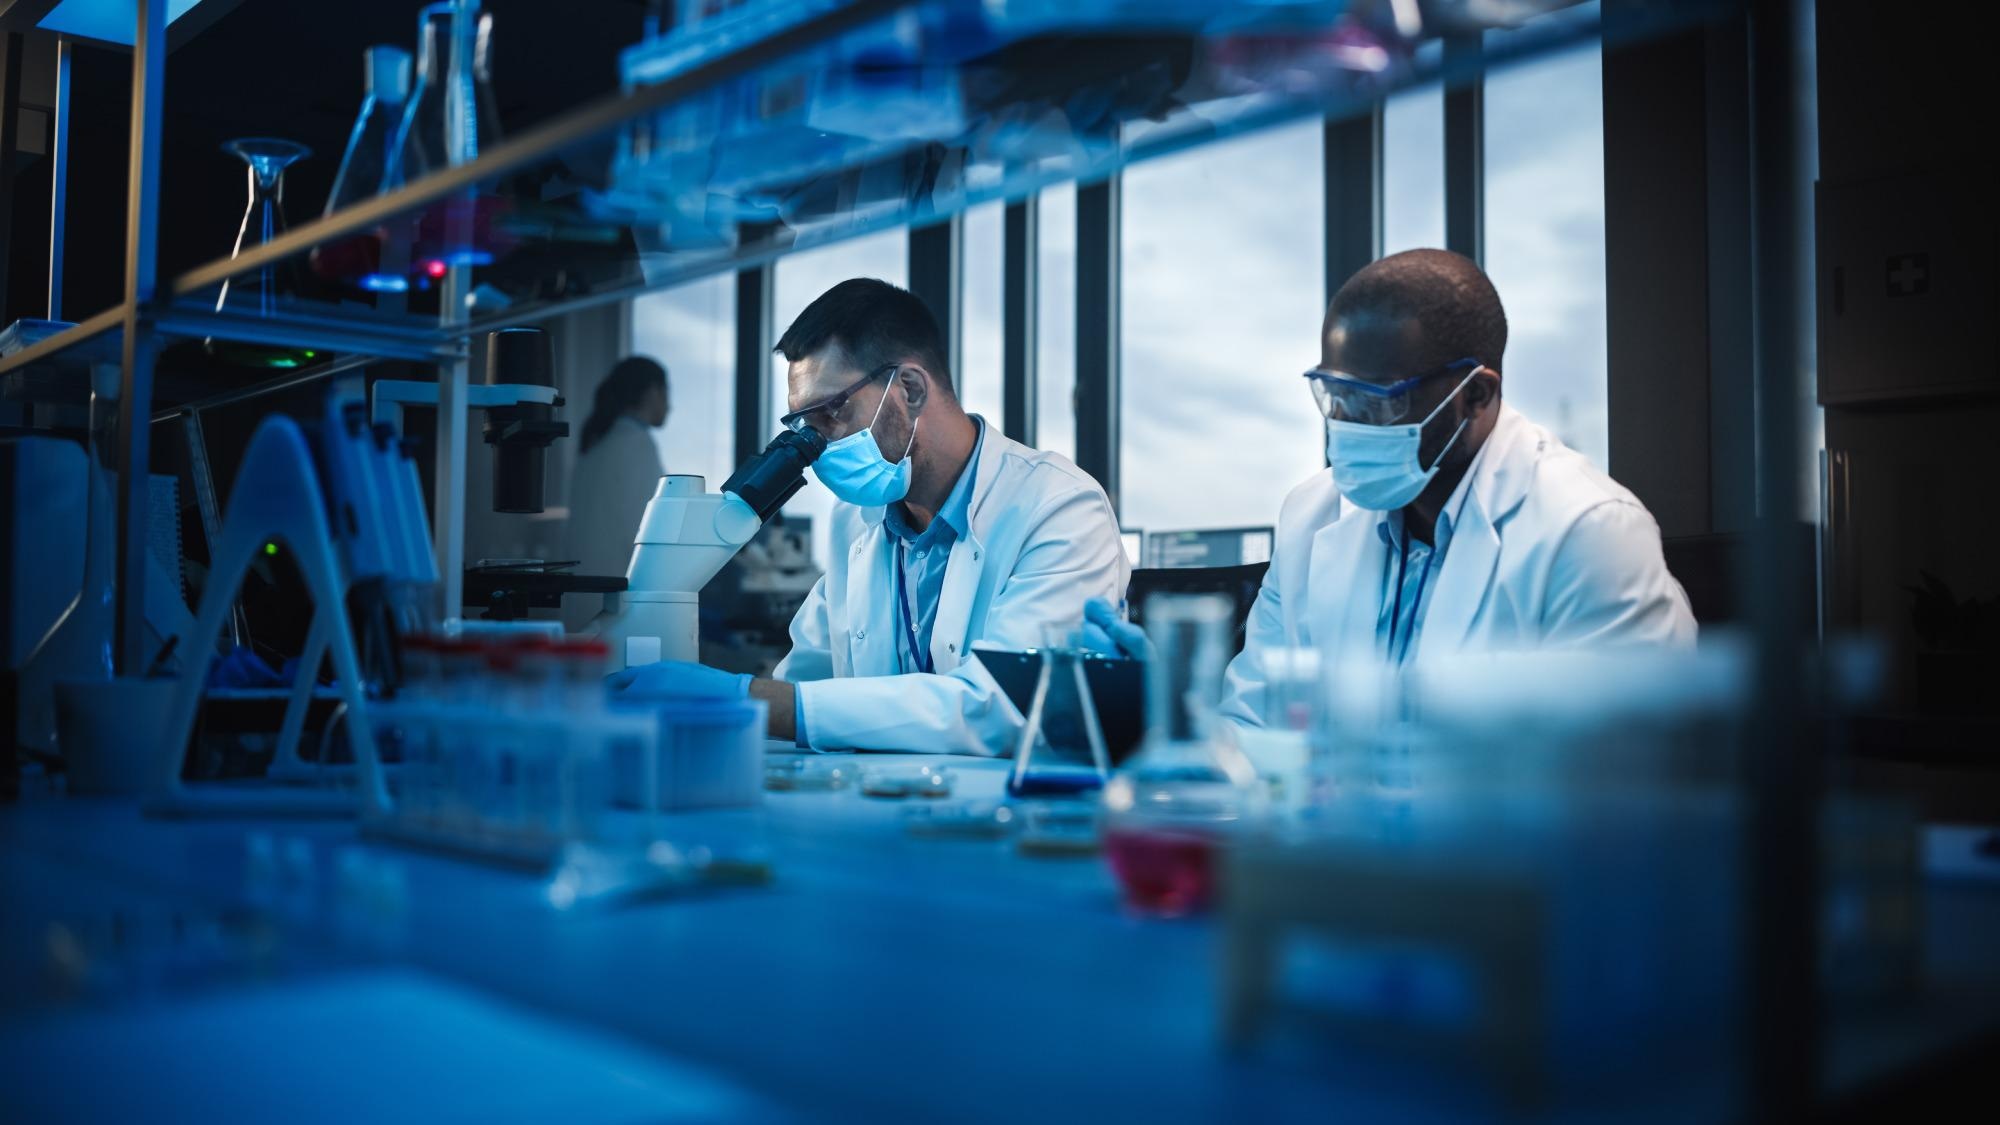 Study: A prospective study of asymptomatic SARS-CoV-2 infection among individuals involved in academic research under limited operations during the COVID-19 pandemicImage Credit: Gorodenkoff / Shutterstock